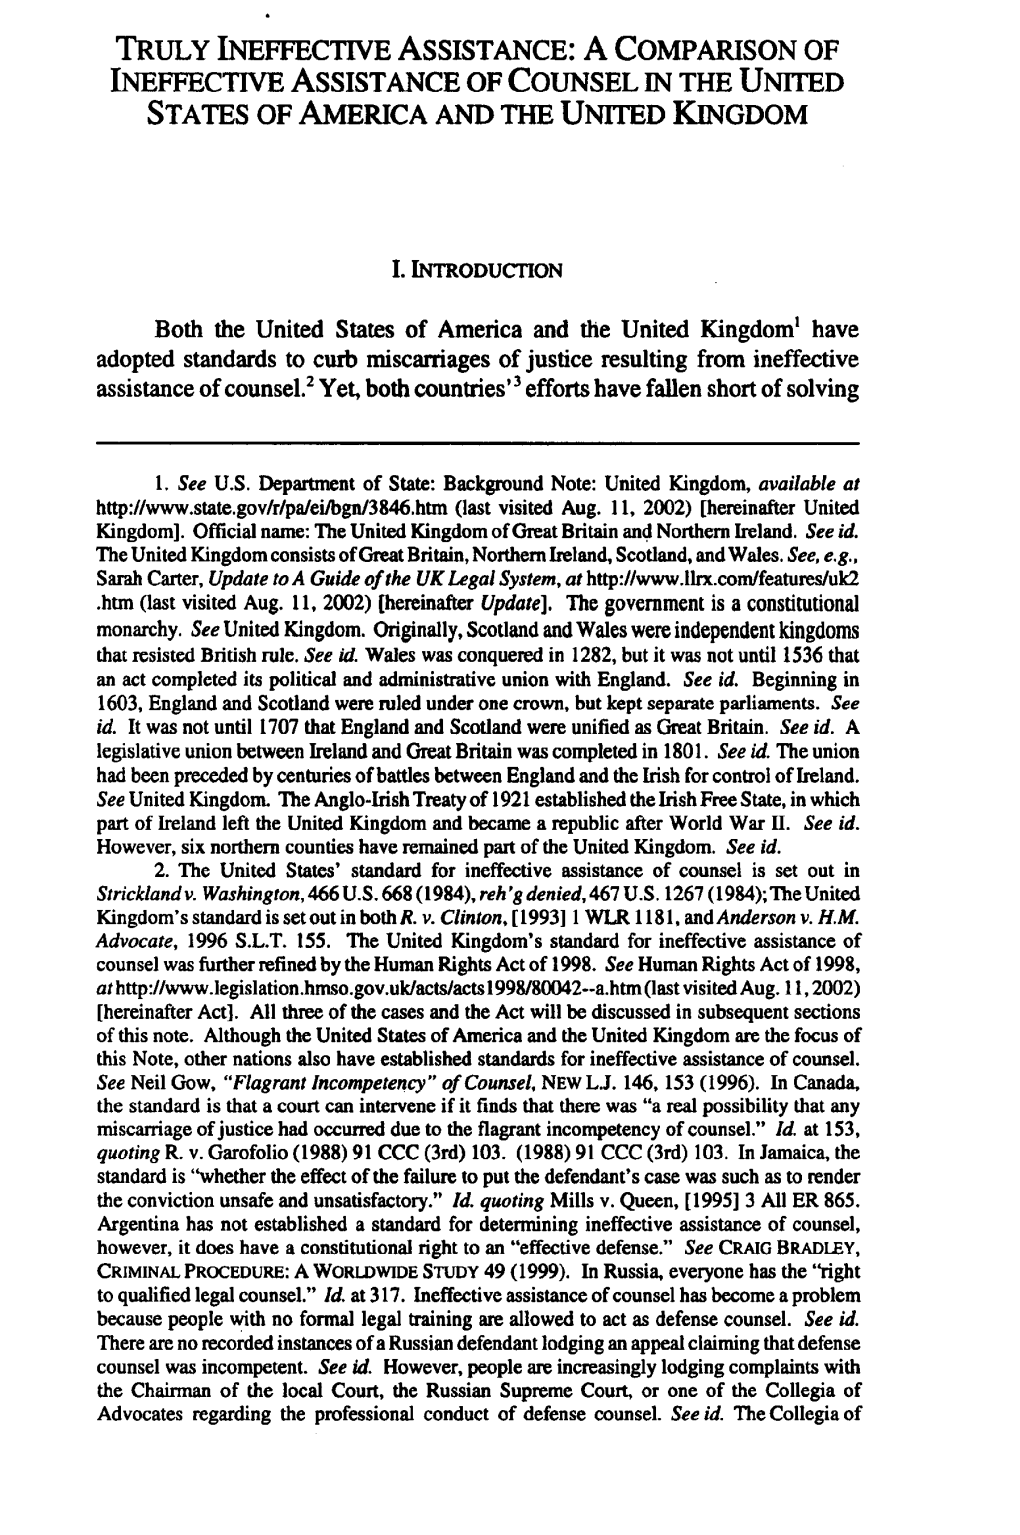 A Comparison of Ineffective Assistance of Counsel in the United States of America and the United Kingdom